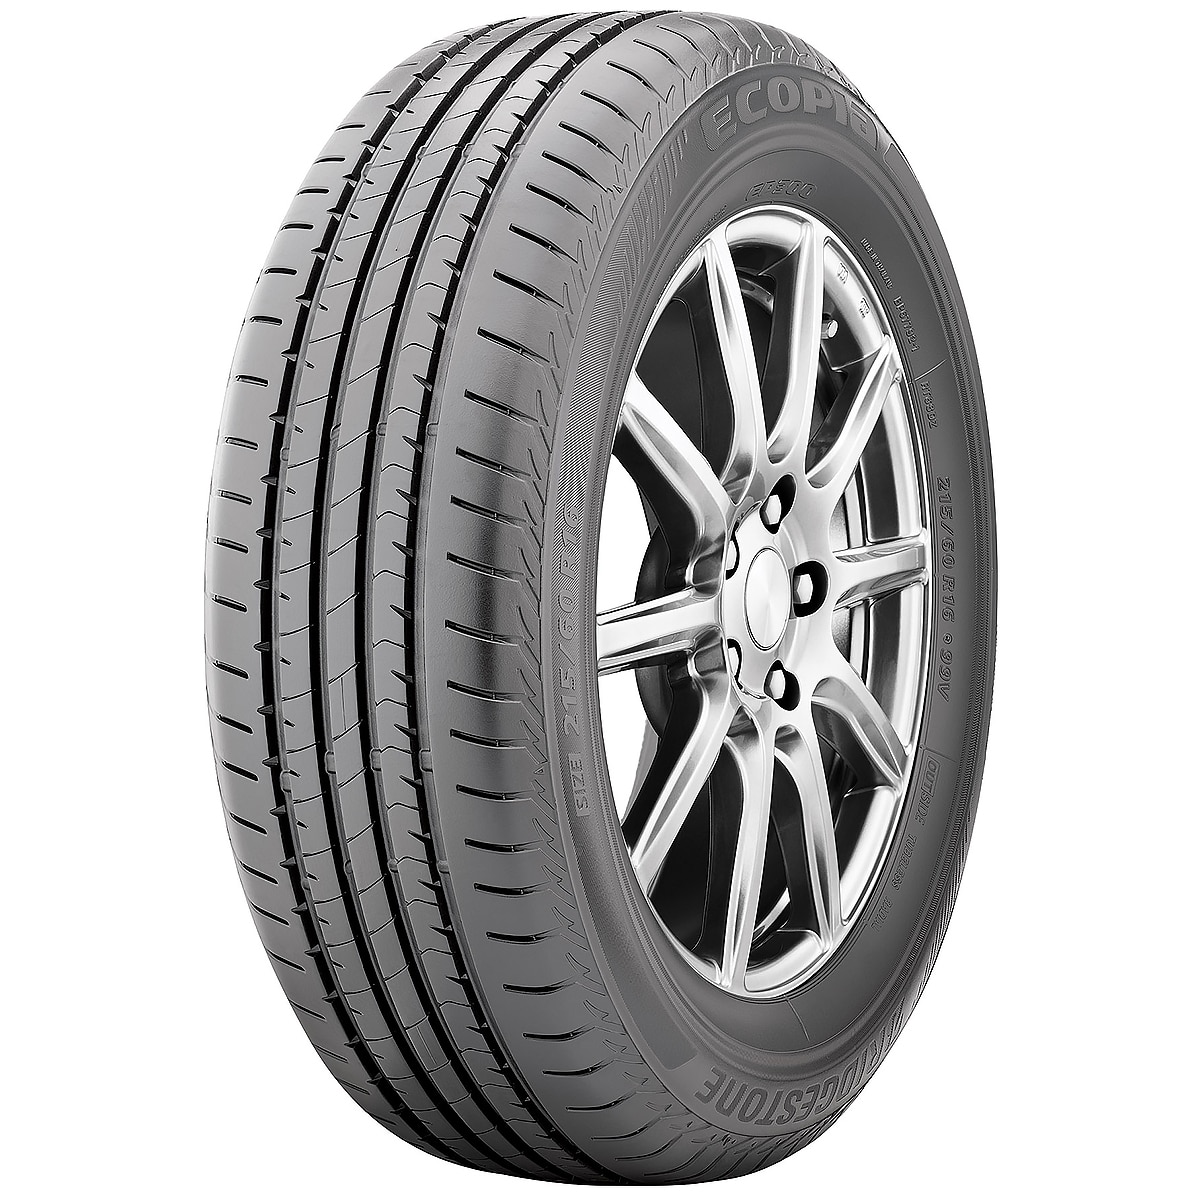 225/60R16 98V BS EP300 - tyre